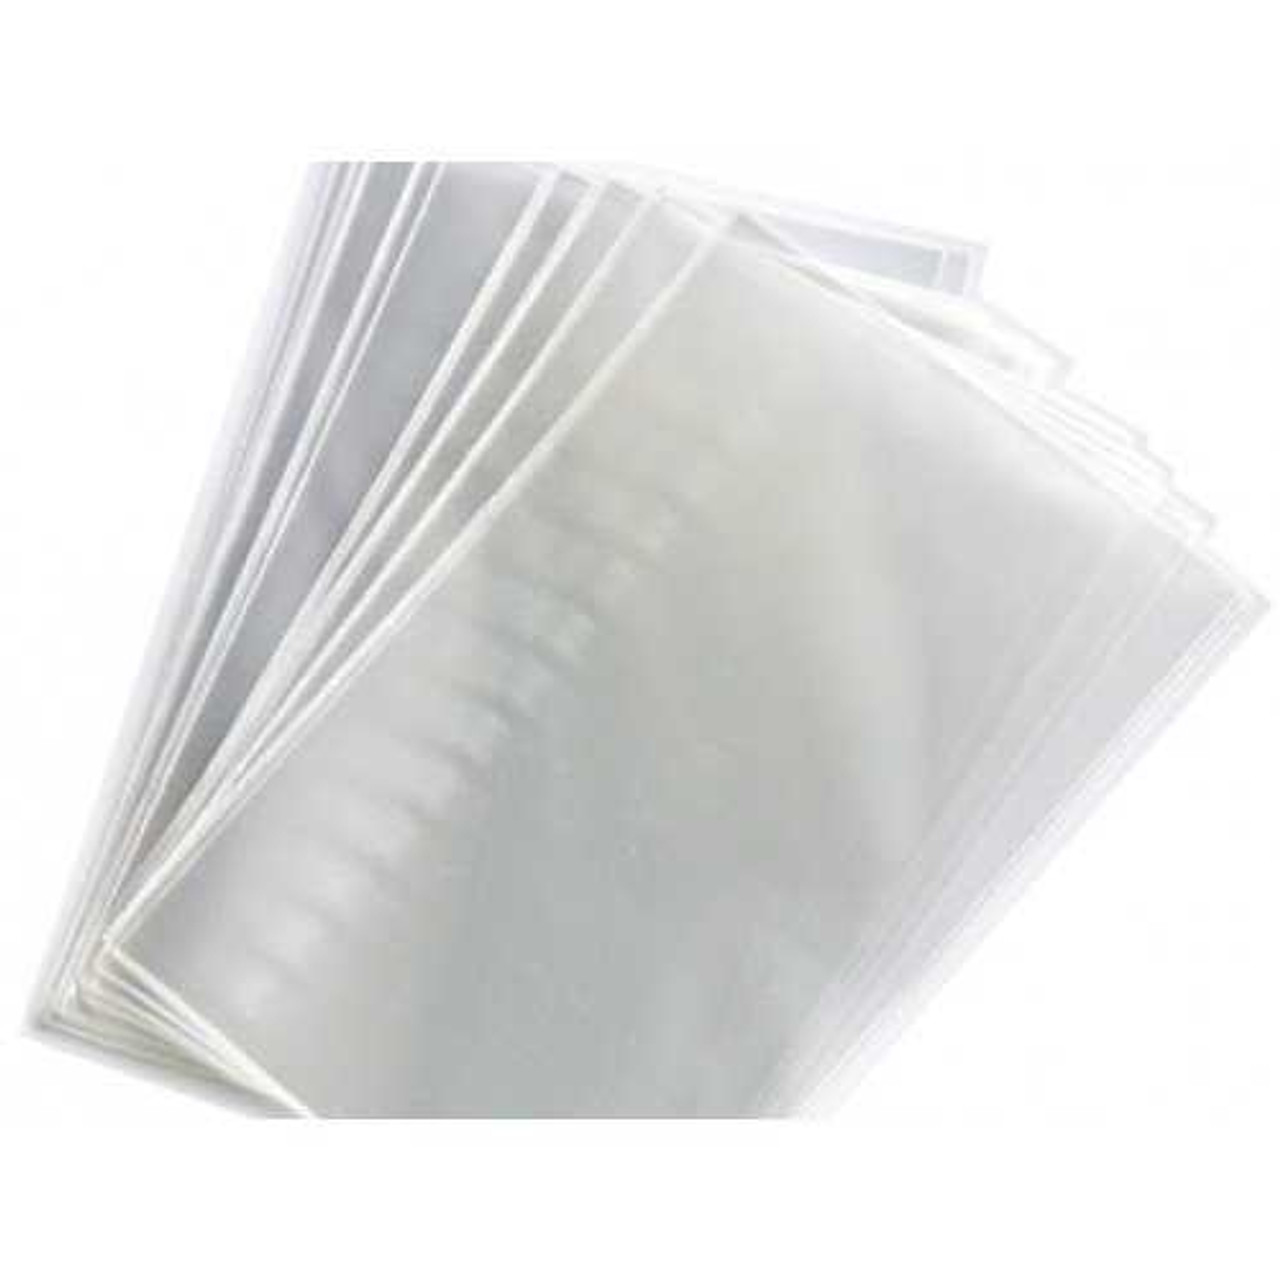 Clear Heat Seal Bags - 5.25 x 10.5 Flat - Set of 100 Bags